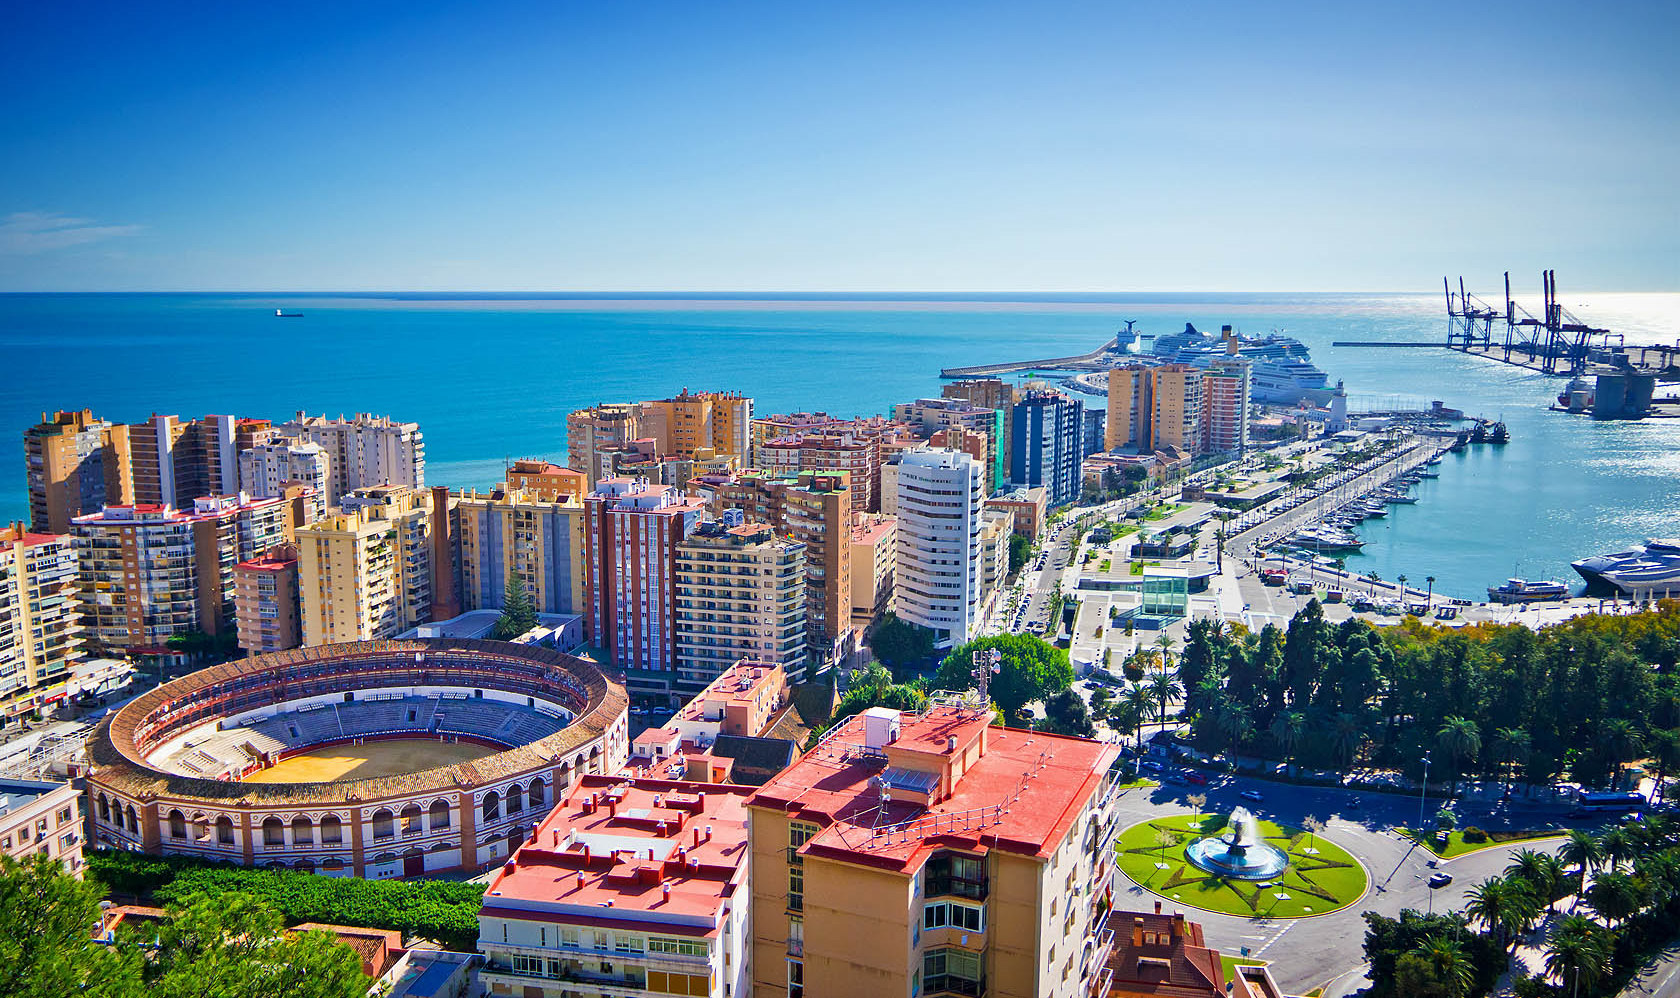 Studies show that the historic city of Málaga is the most popular Spanish city amongst tourists and international home buyers